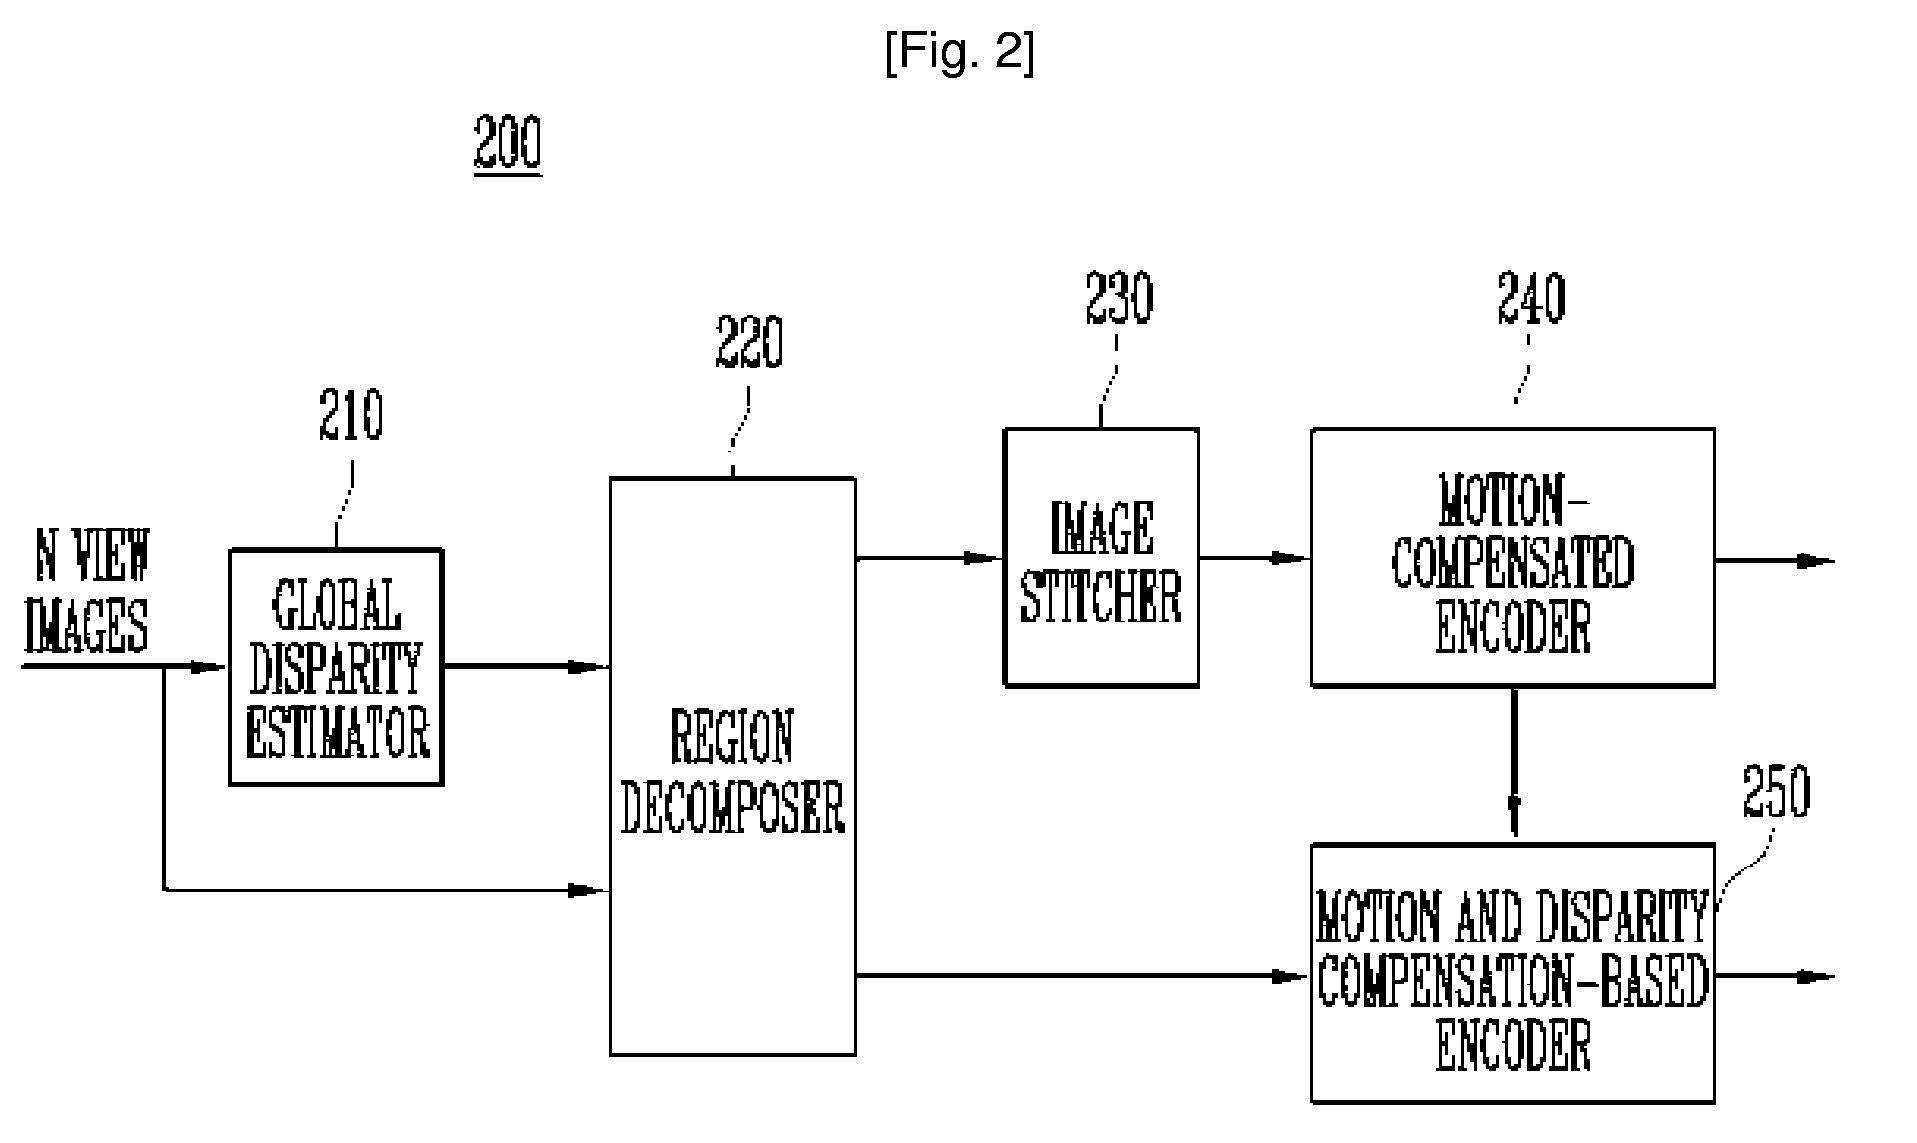 Method and Apparatus for Encoding and Decoding Multi-View Video Using Image Stitching